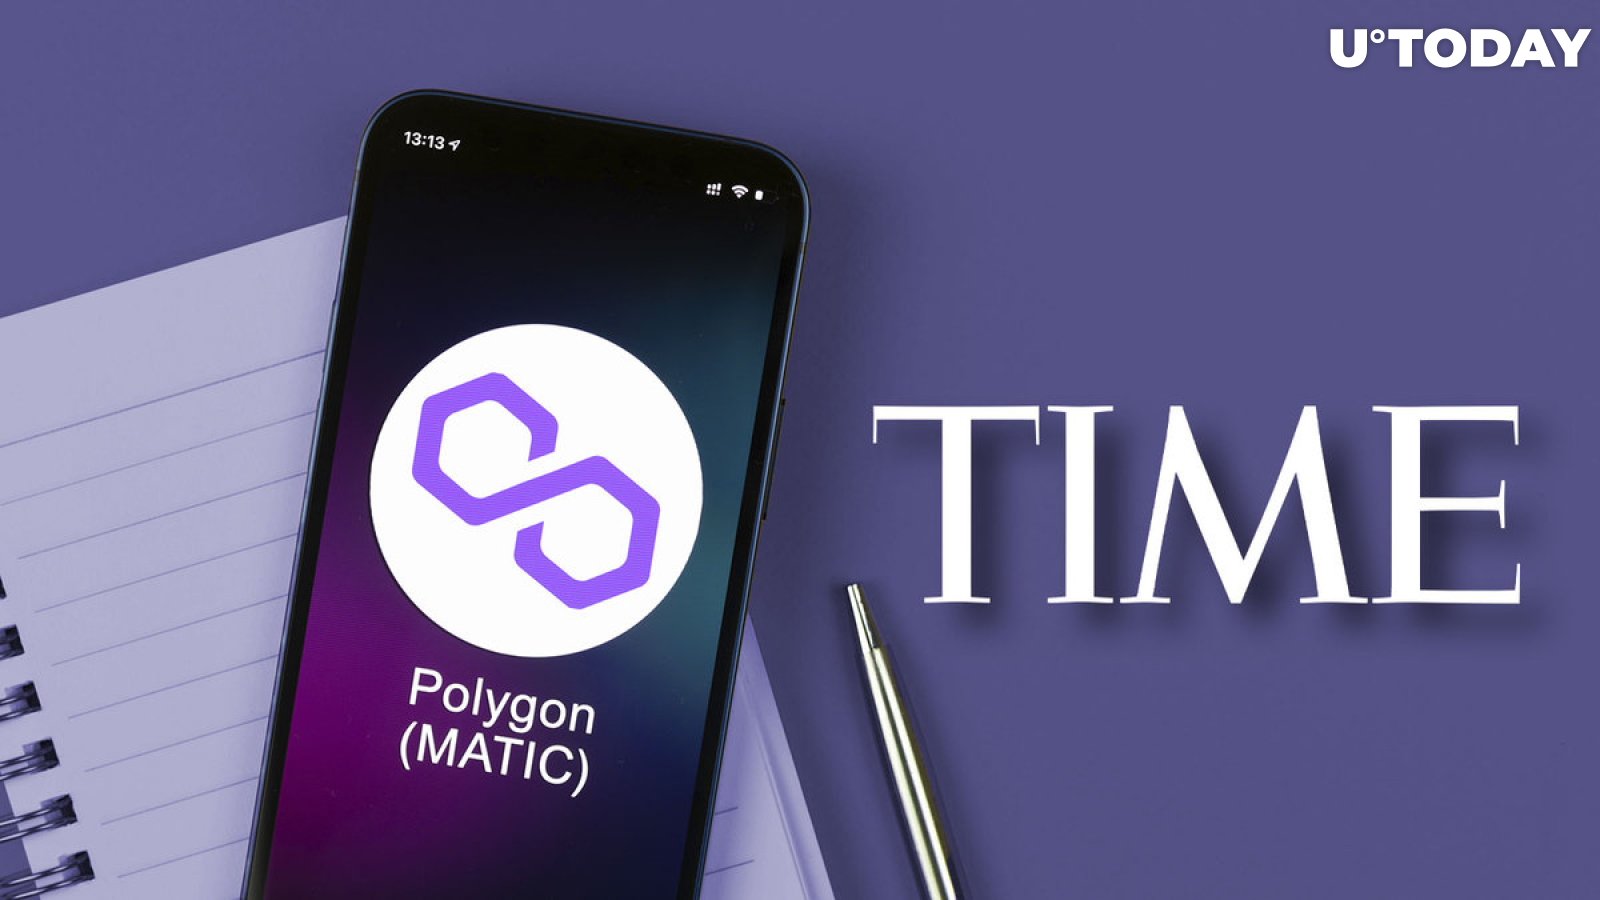 Four Crypto Majors Included in TIME's 100 Most Influential Companies: Check Them Out